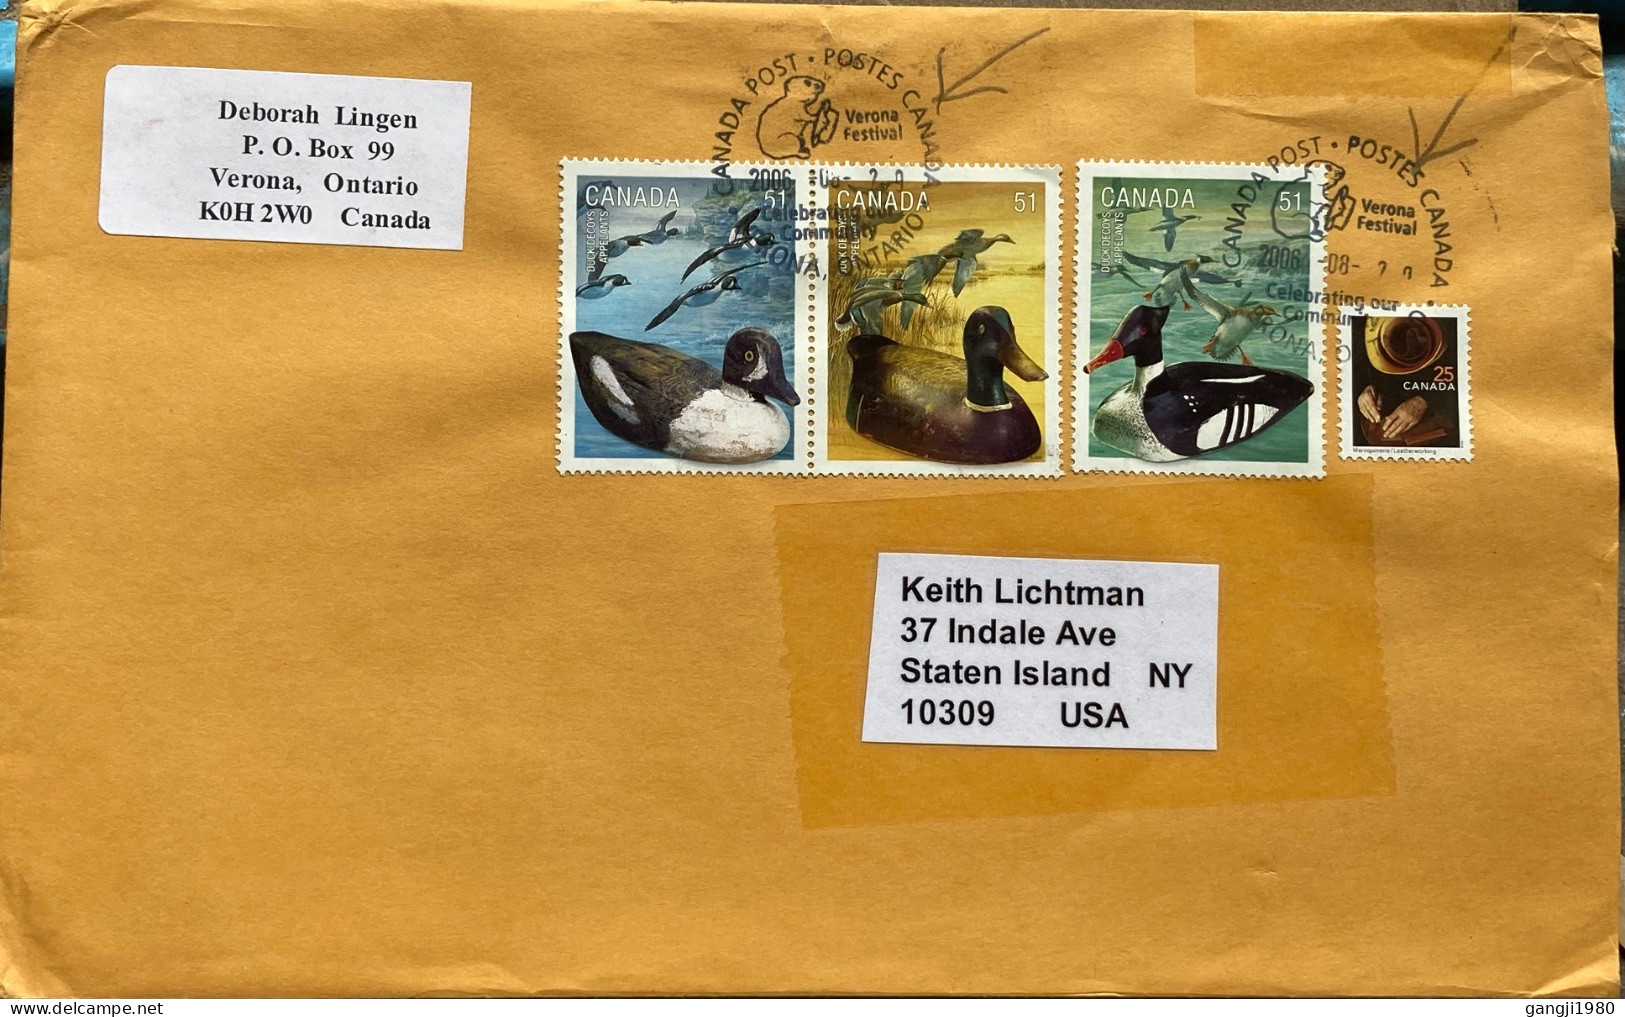 CANADA-2006, COVER USED TO USA, 4 BIRD DUCK STAMP, ANIMAL PICTURE CANCEL, VERON CITY FESTIVAL, CELEBRATING OUR COMMUNITY - Brieven En Documenten